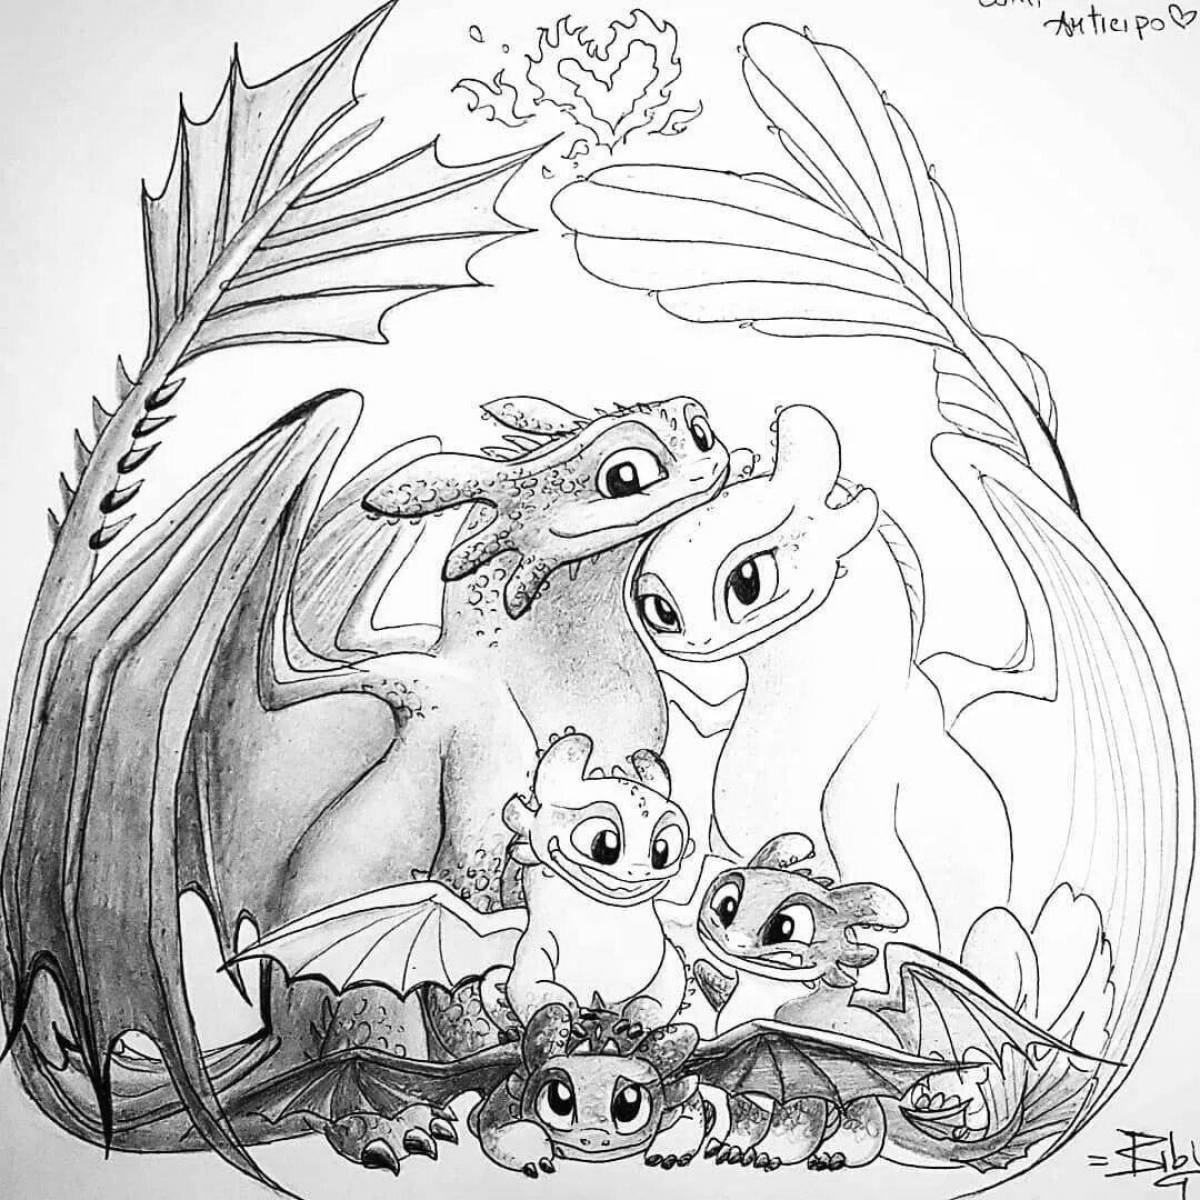 Gorgeous Night Fury coloring page